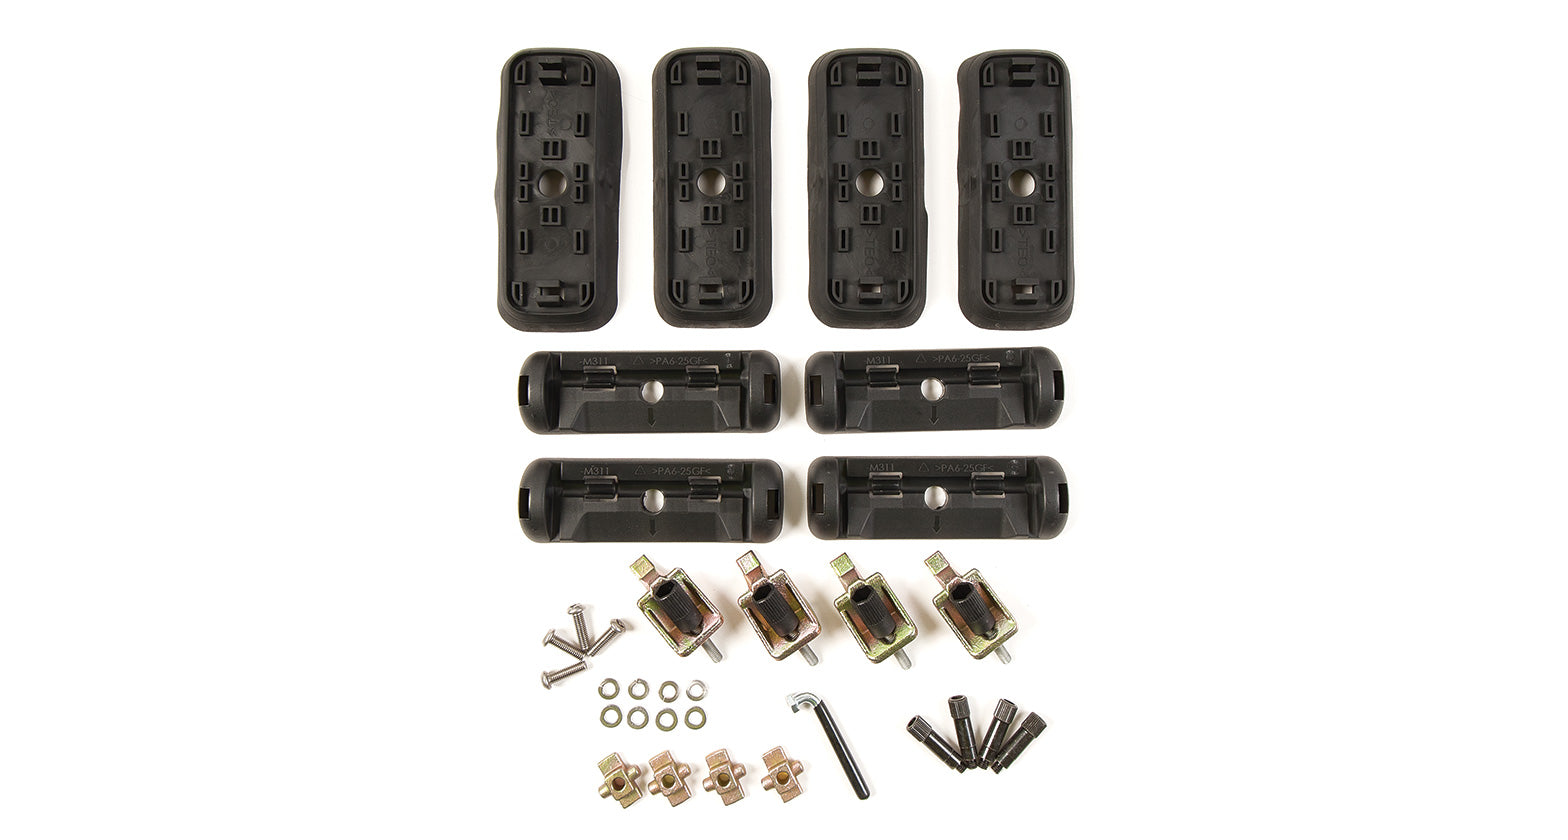 FIXED POINT KIT FOR RHINO 2500 MULTI FIT - DK328